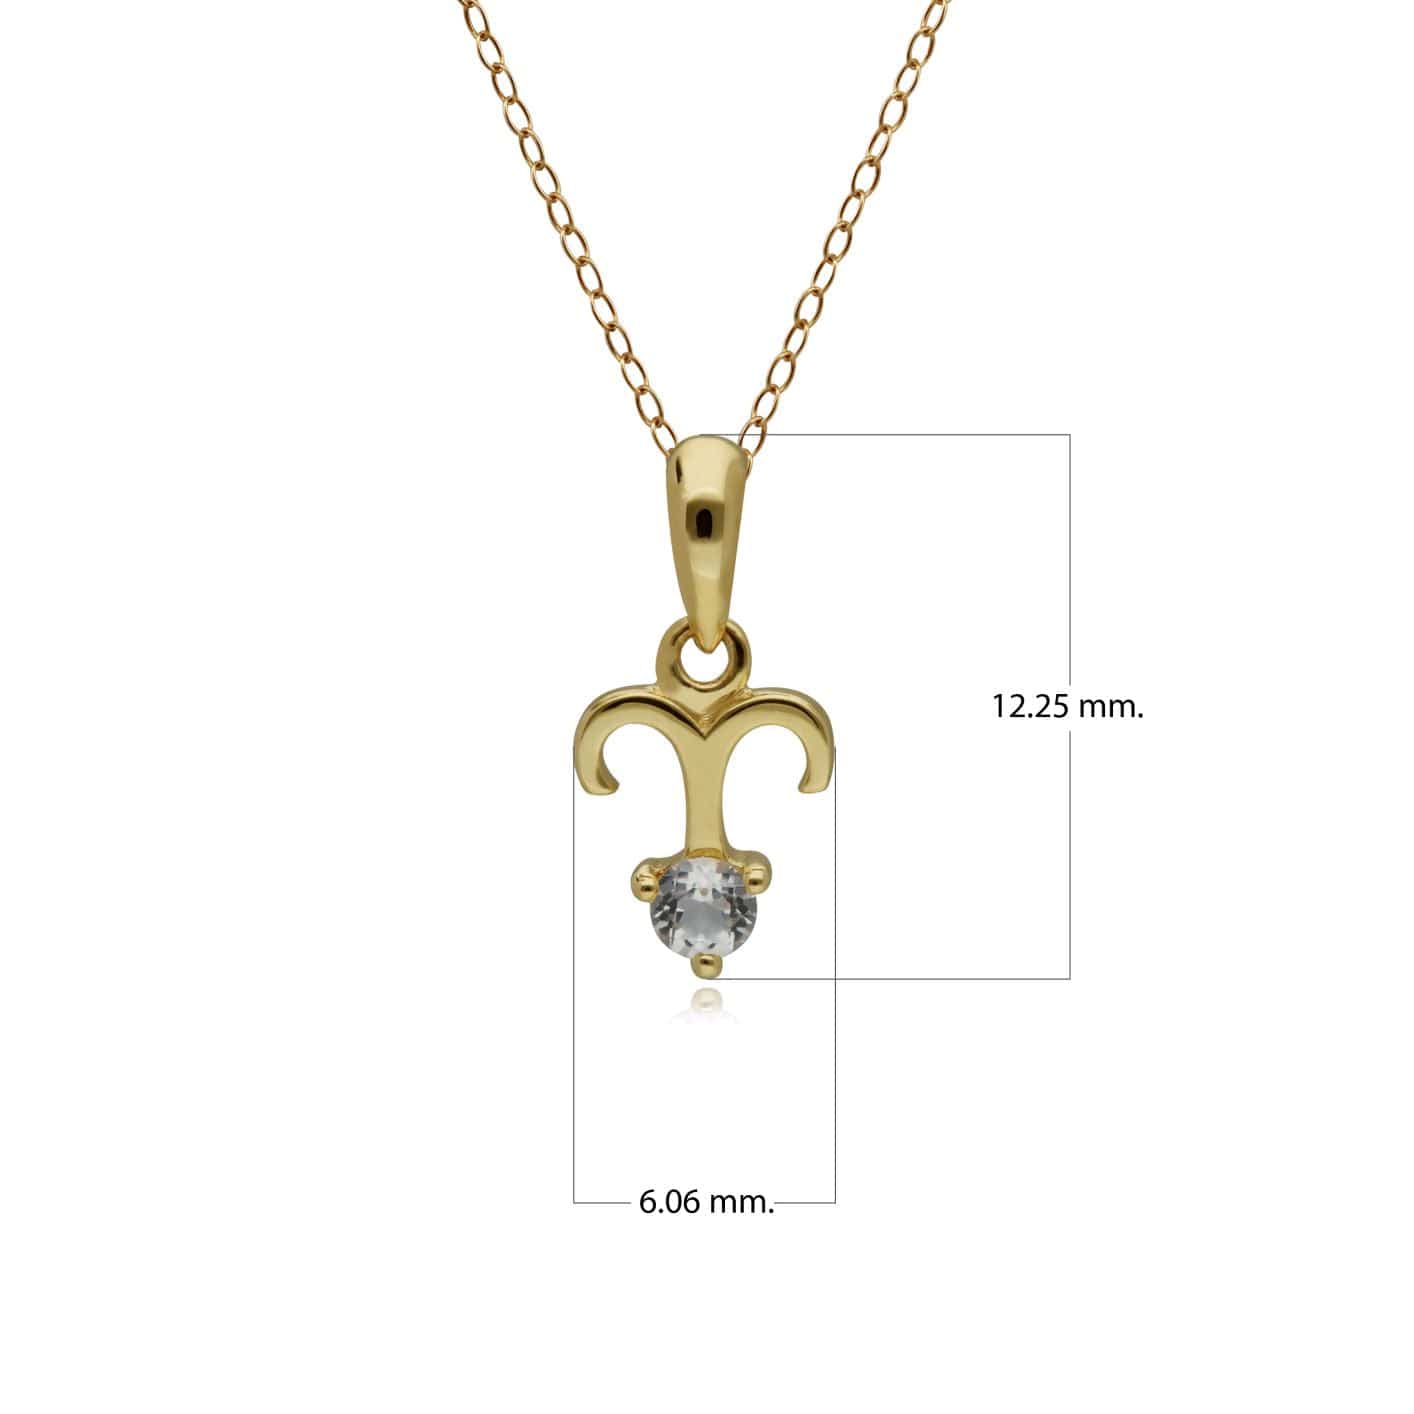 135P1995019 White Topaz Aries Zodiac Charm Necklace in 9ct Yellow Gold 3